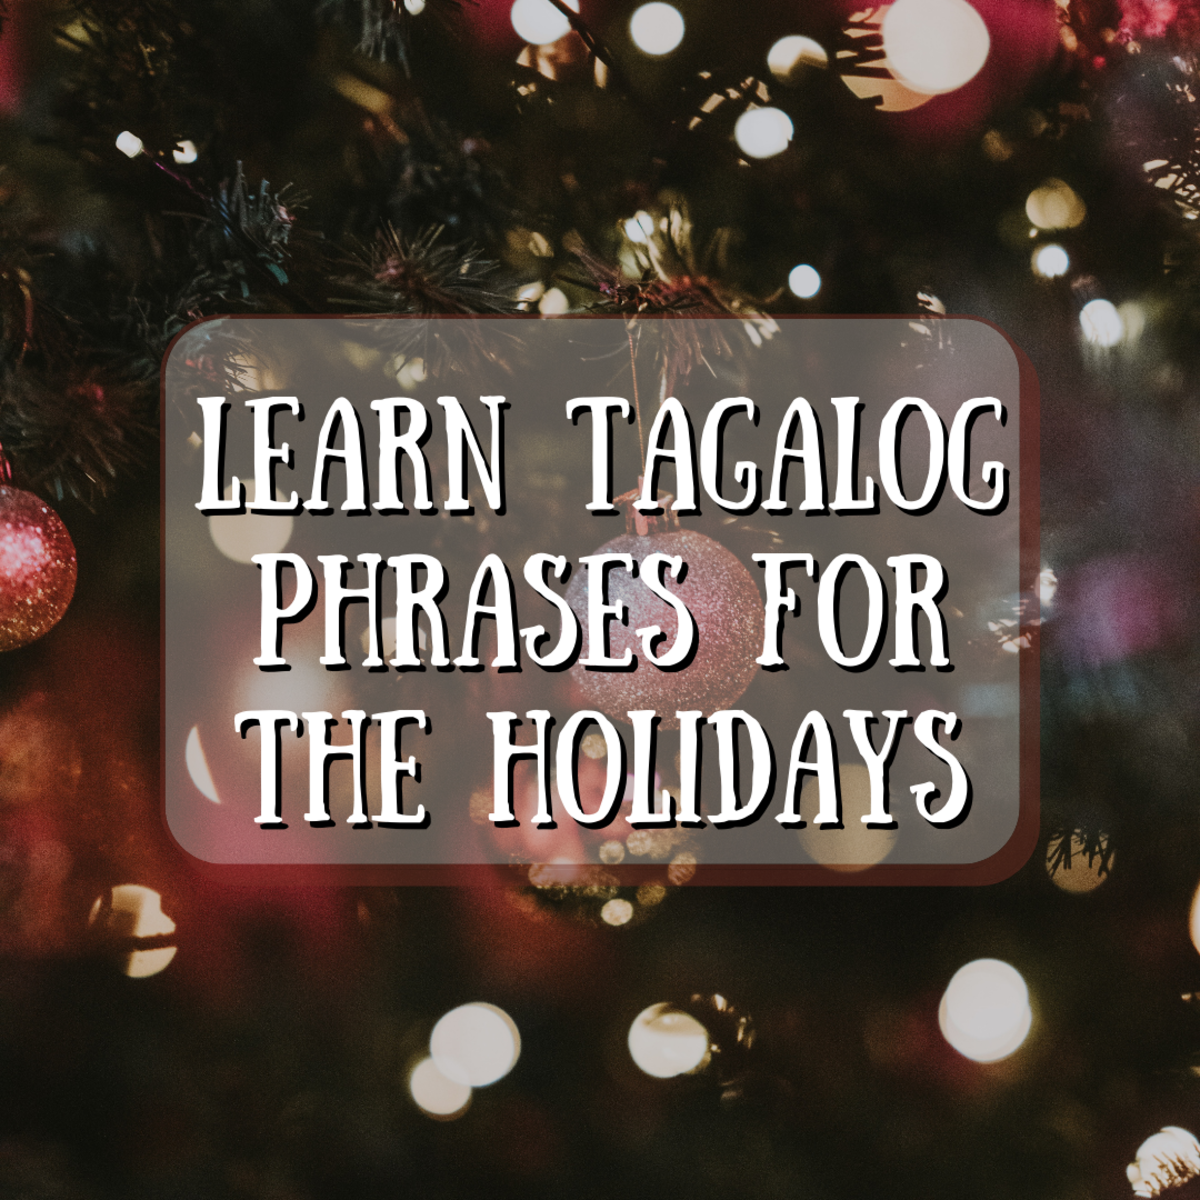 Useful Tagalog Phrases and Words for the Holidays